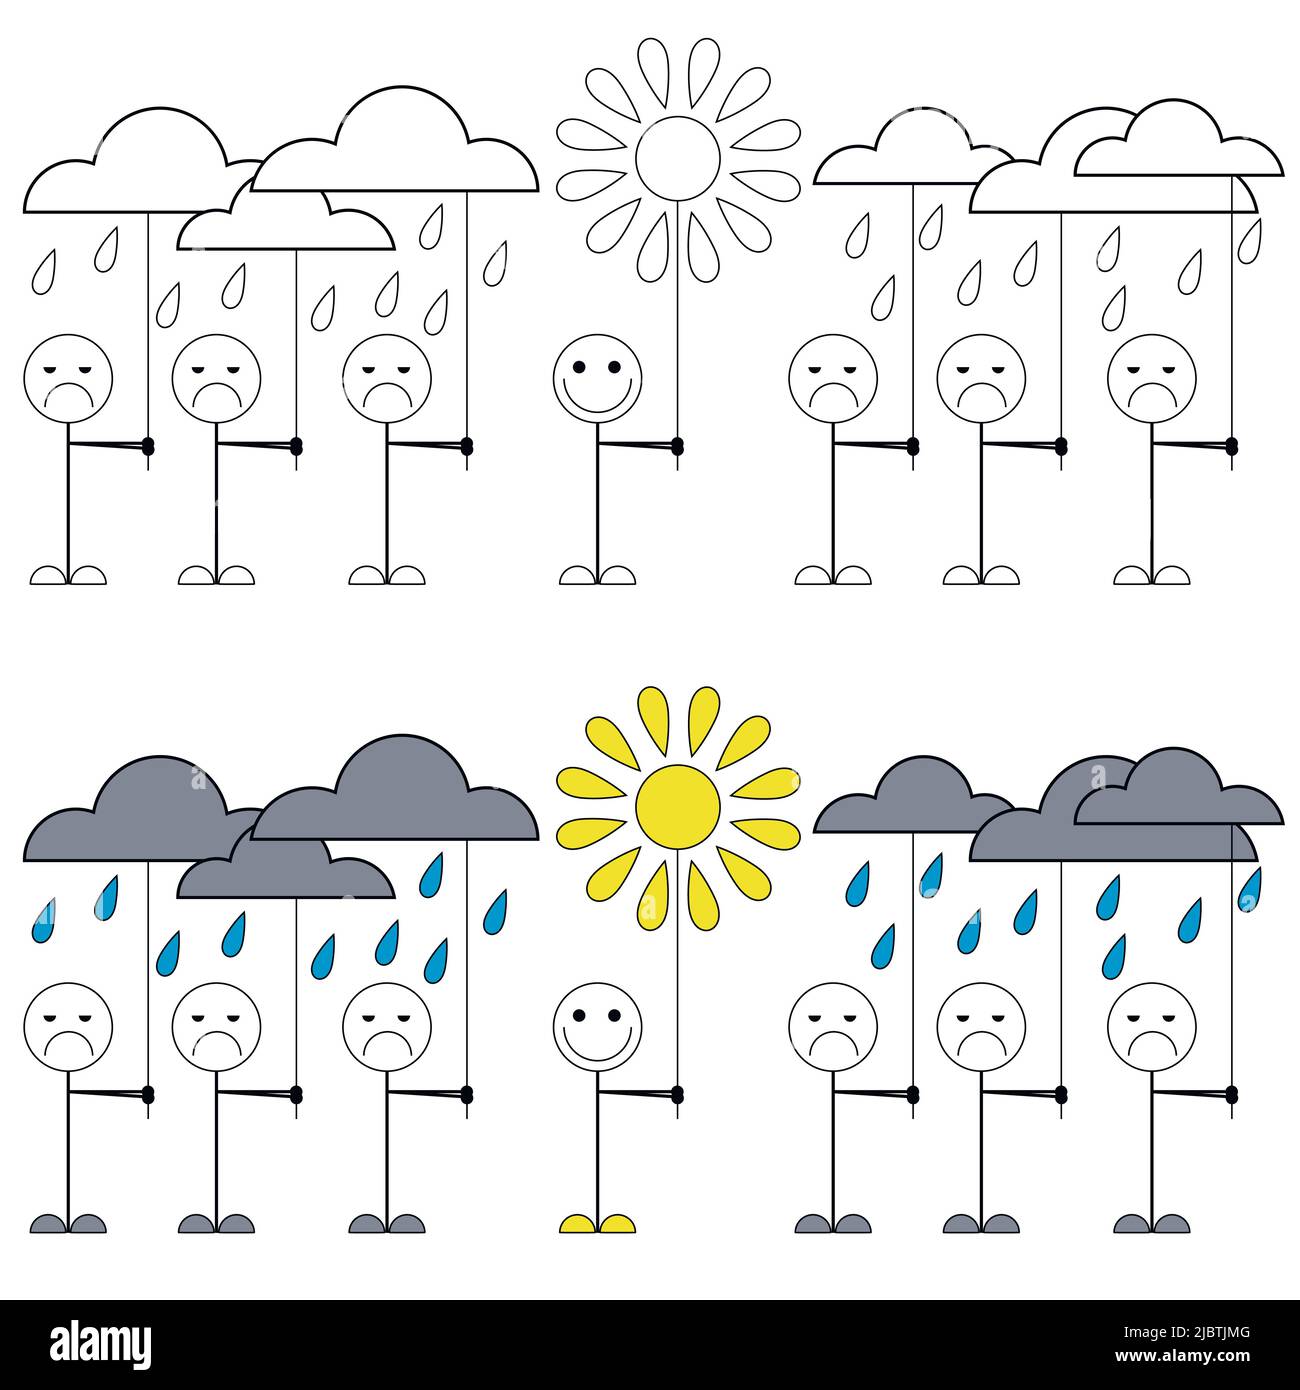 Good mood. Illustration of little men with sad faces and one happy. A drawing that shows how important it is to have a positive attitude. Stock Vector